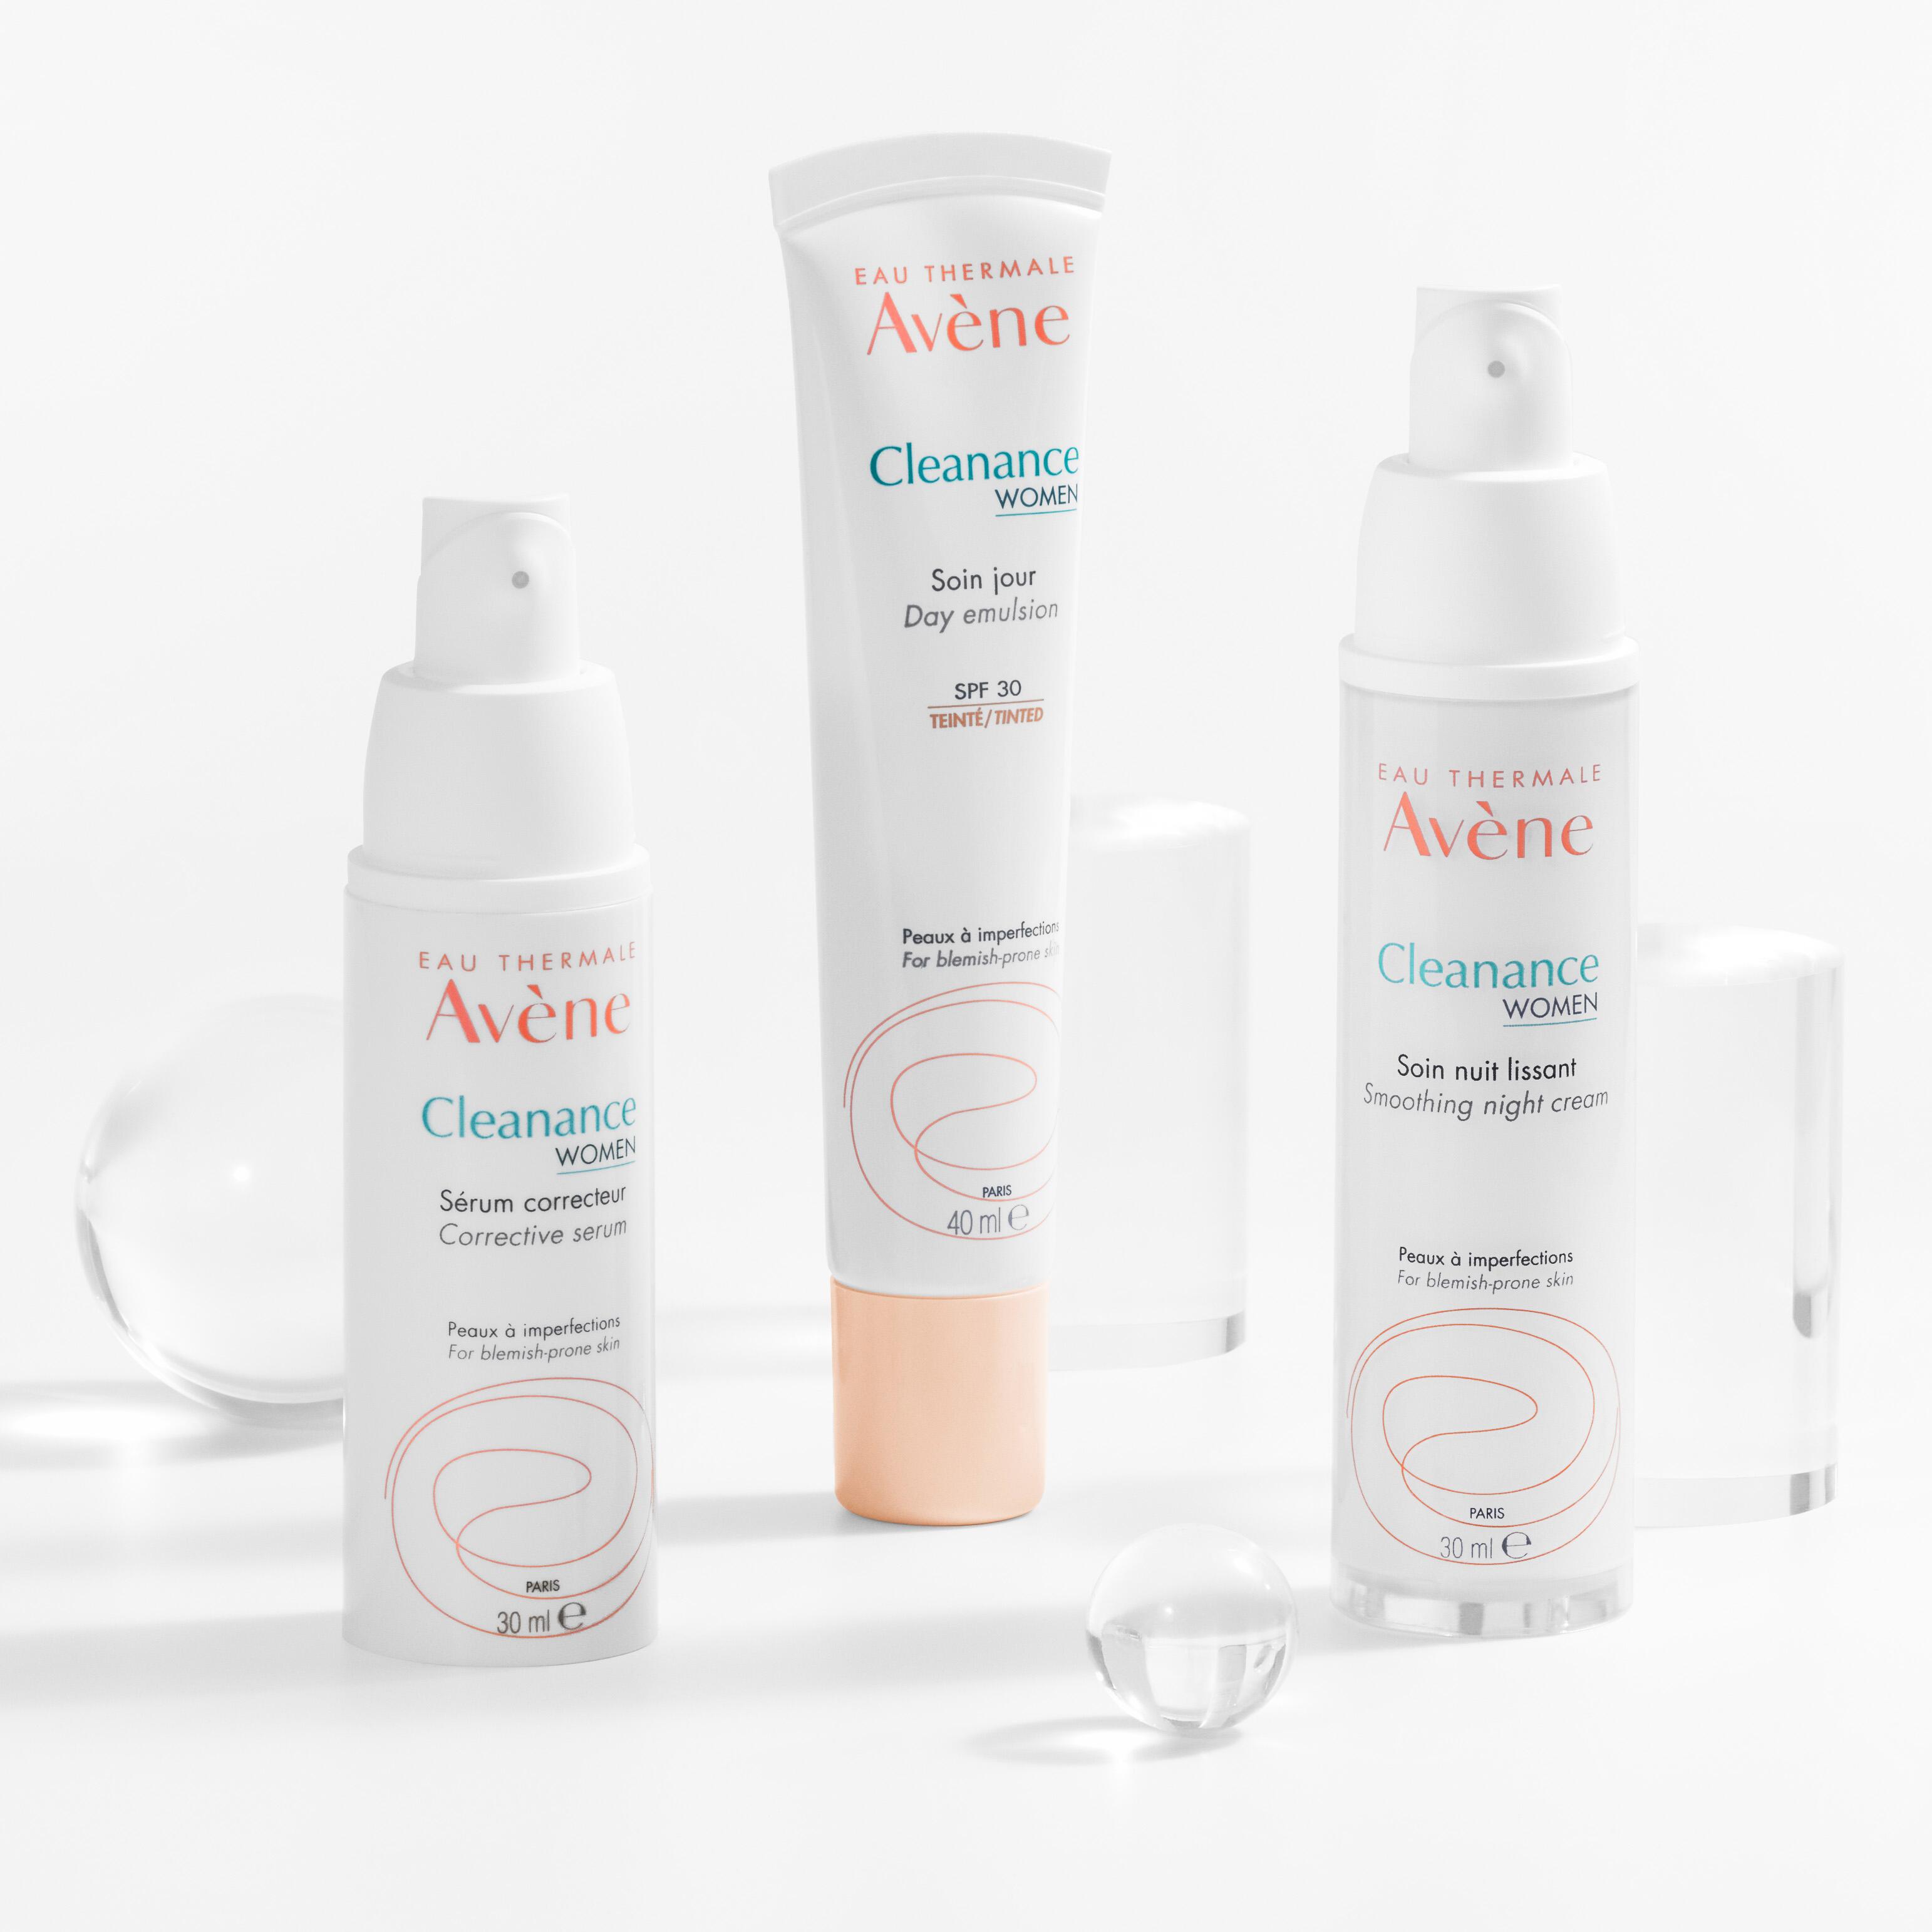 NEW Cleanance Women, Say good bye to acne 👋 Introducing Cleanance Women,  our NEW skincare range formulated with a new active ingredient that acts  against the inflammatory